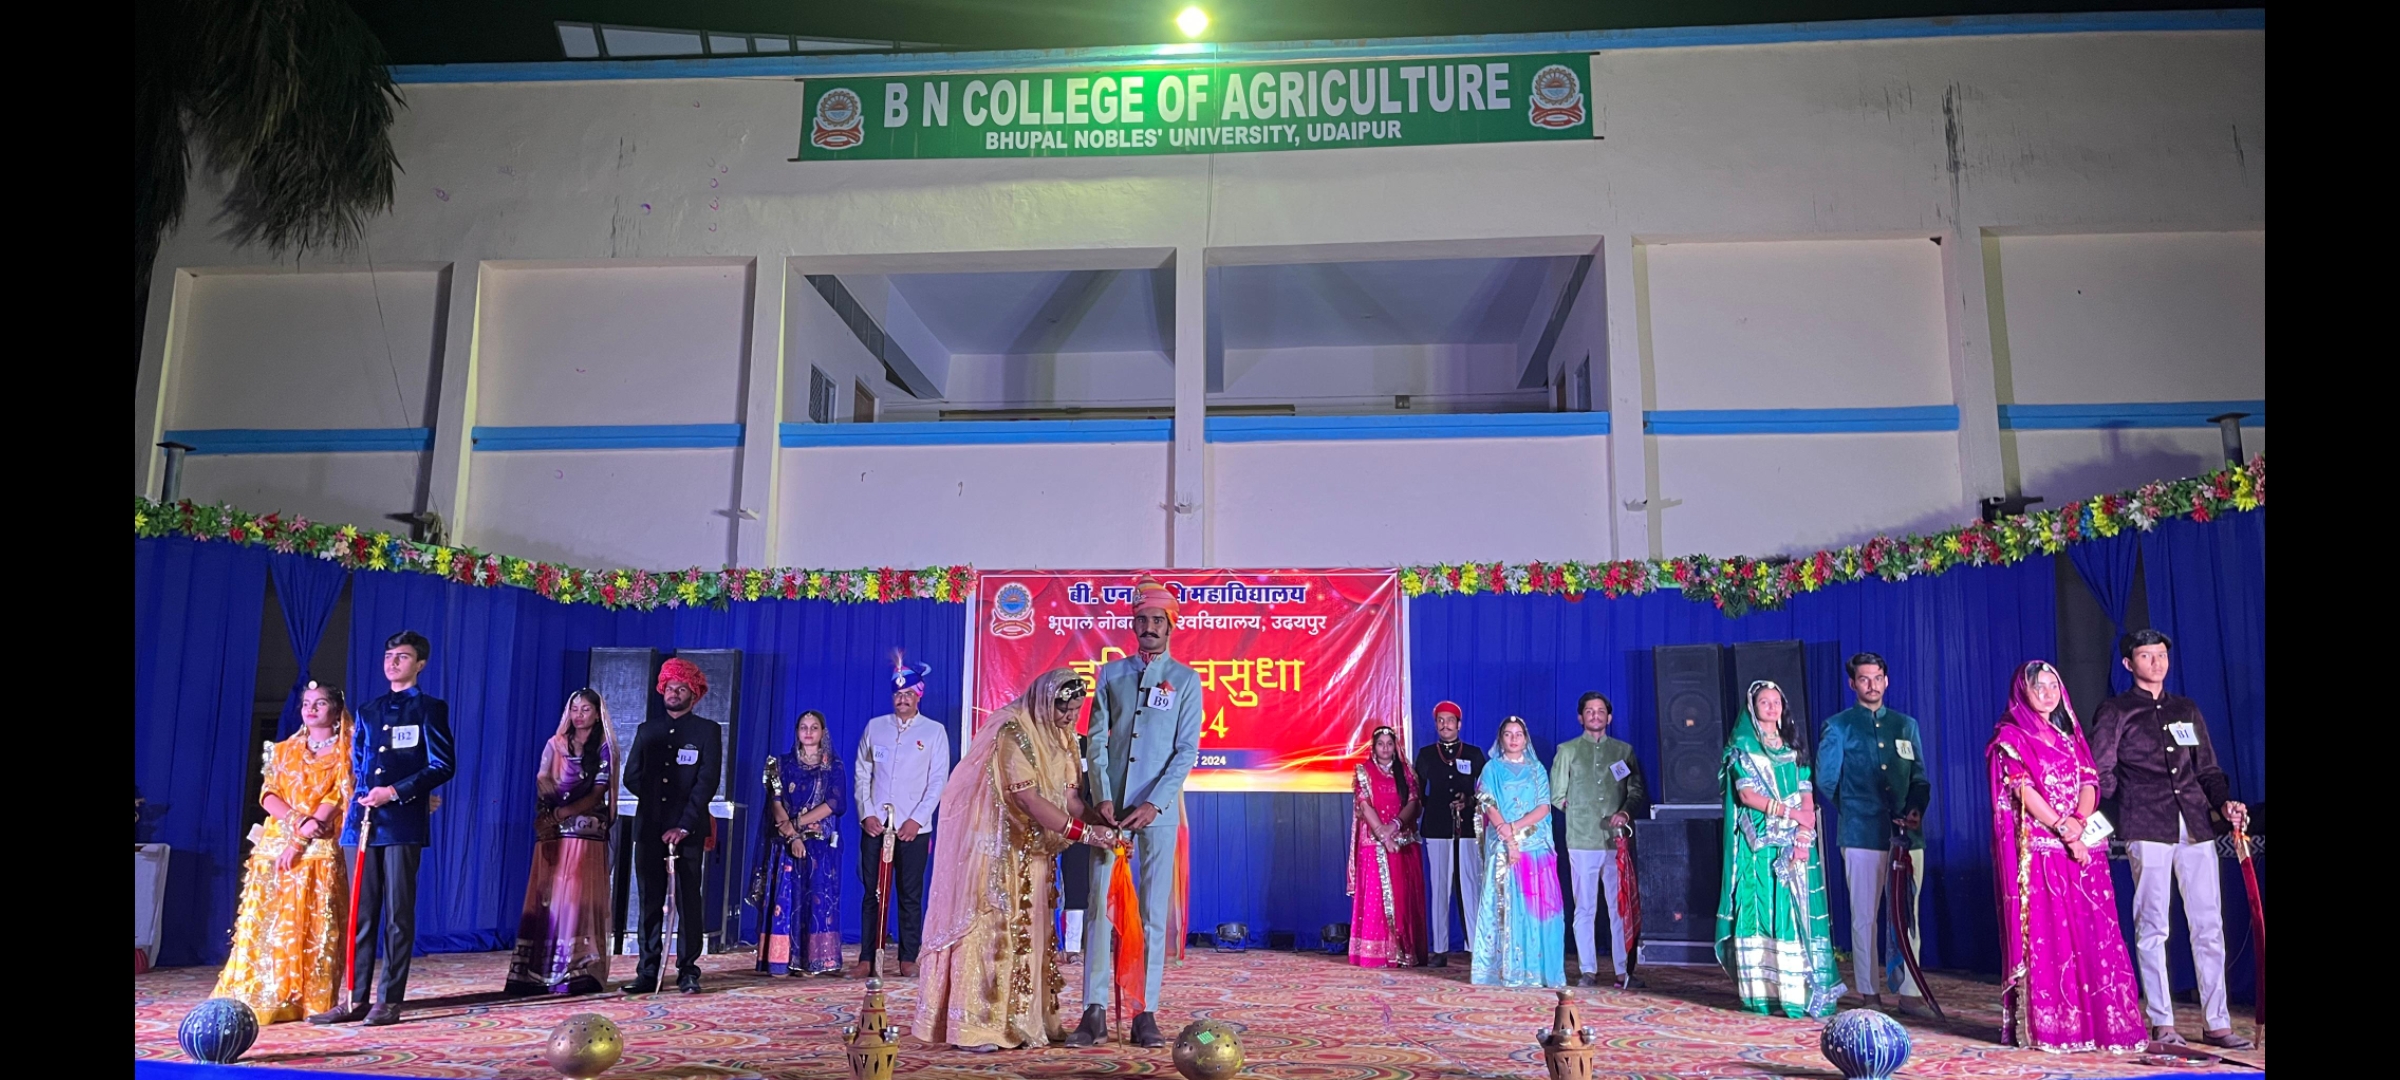 Annual Celebration "Harit-Vasudha" of B.N. Agricultural College Concluded